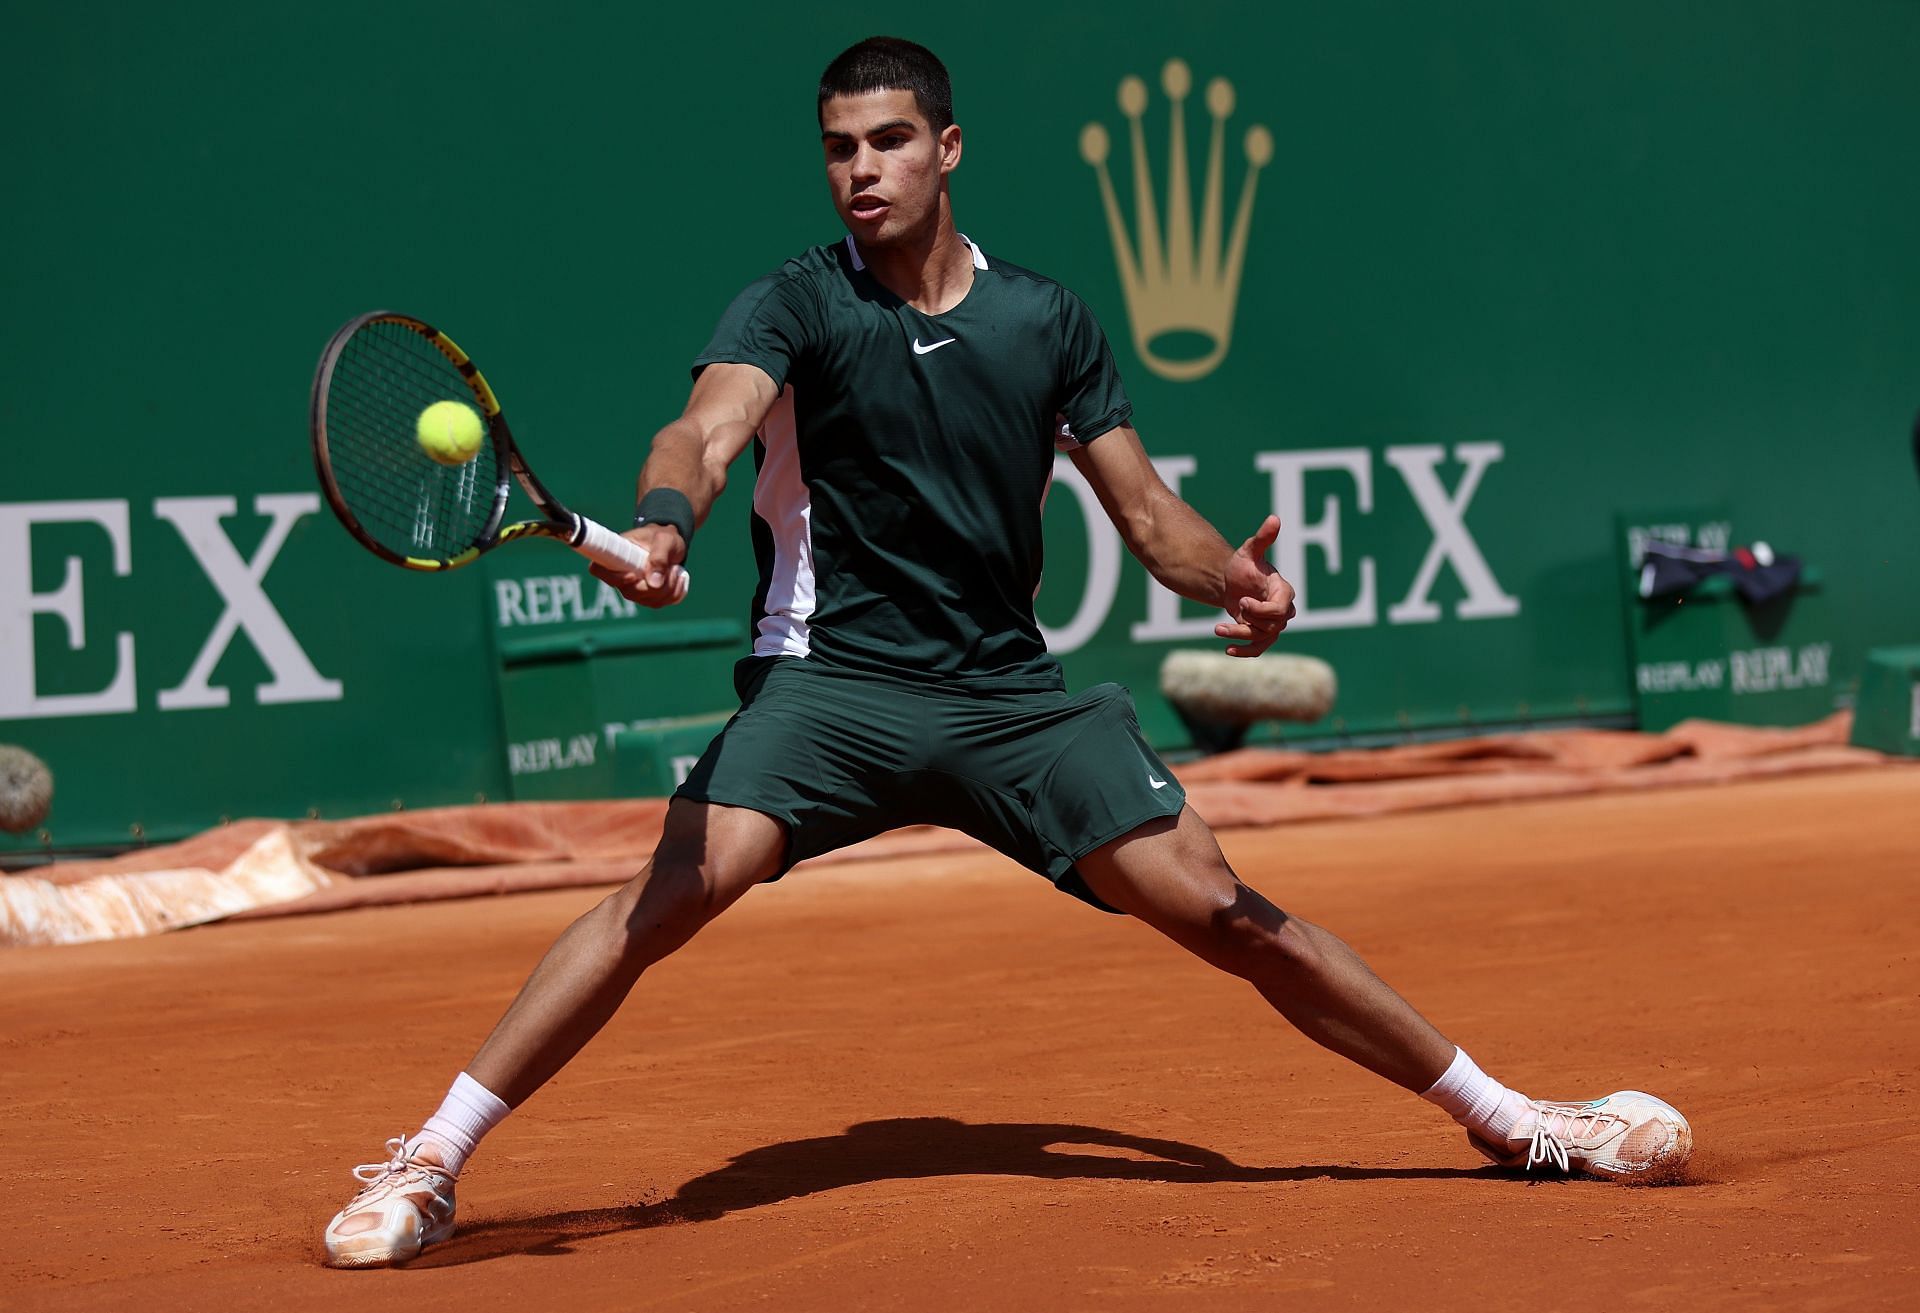 Alcaraz is among the favorites for the Barcelona Open